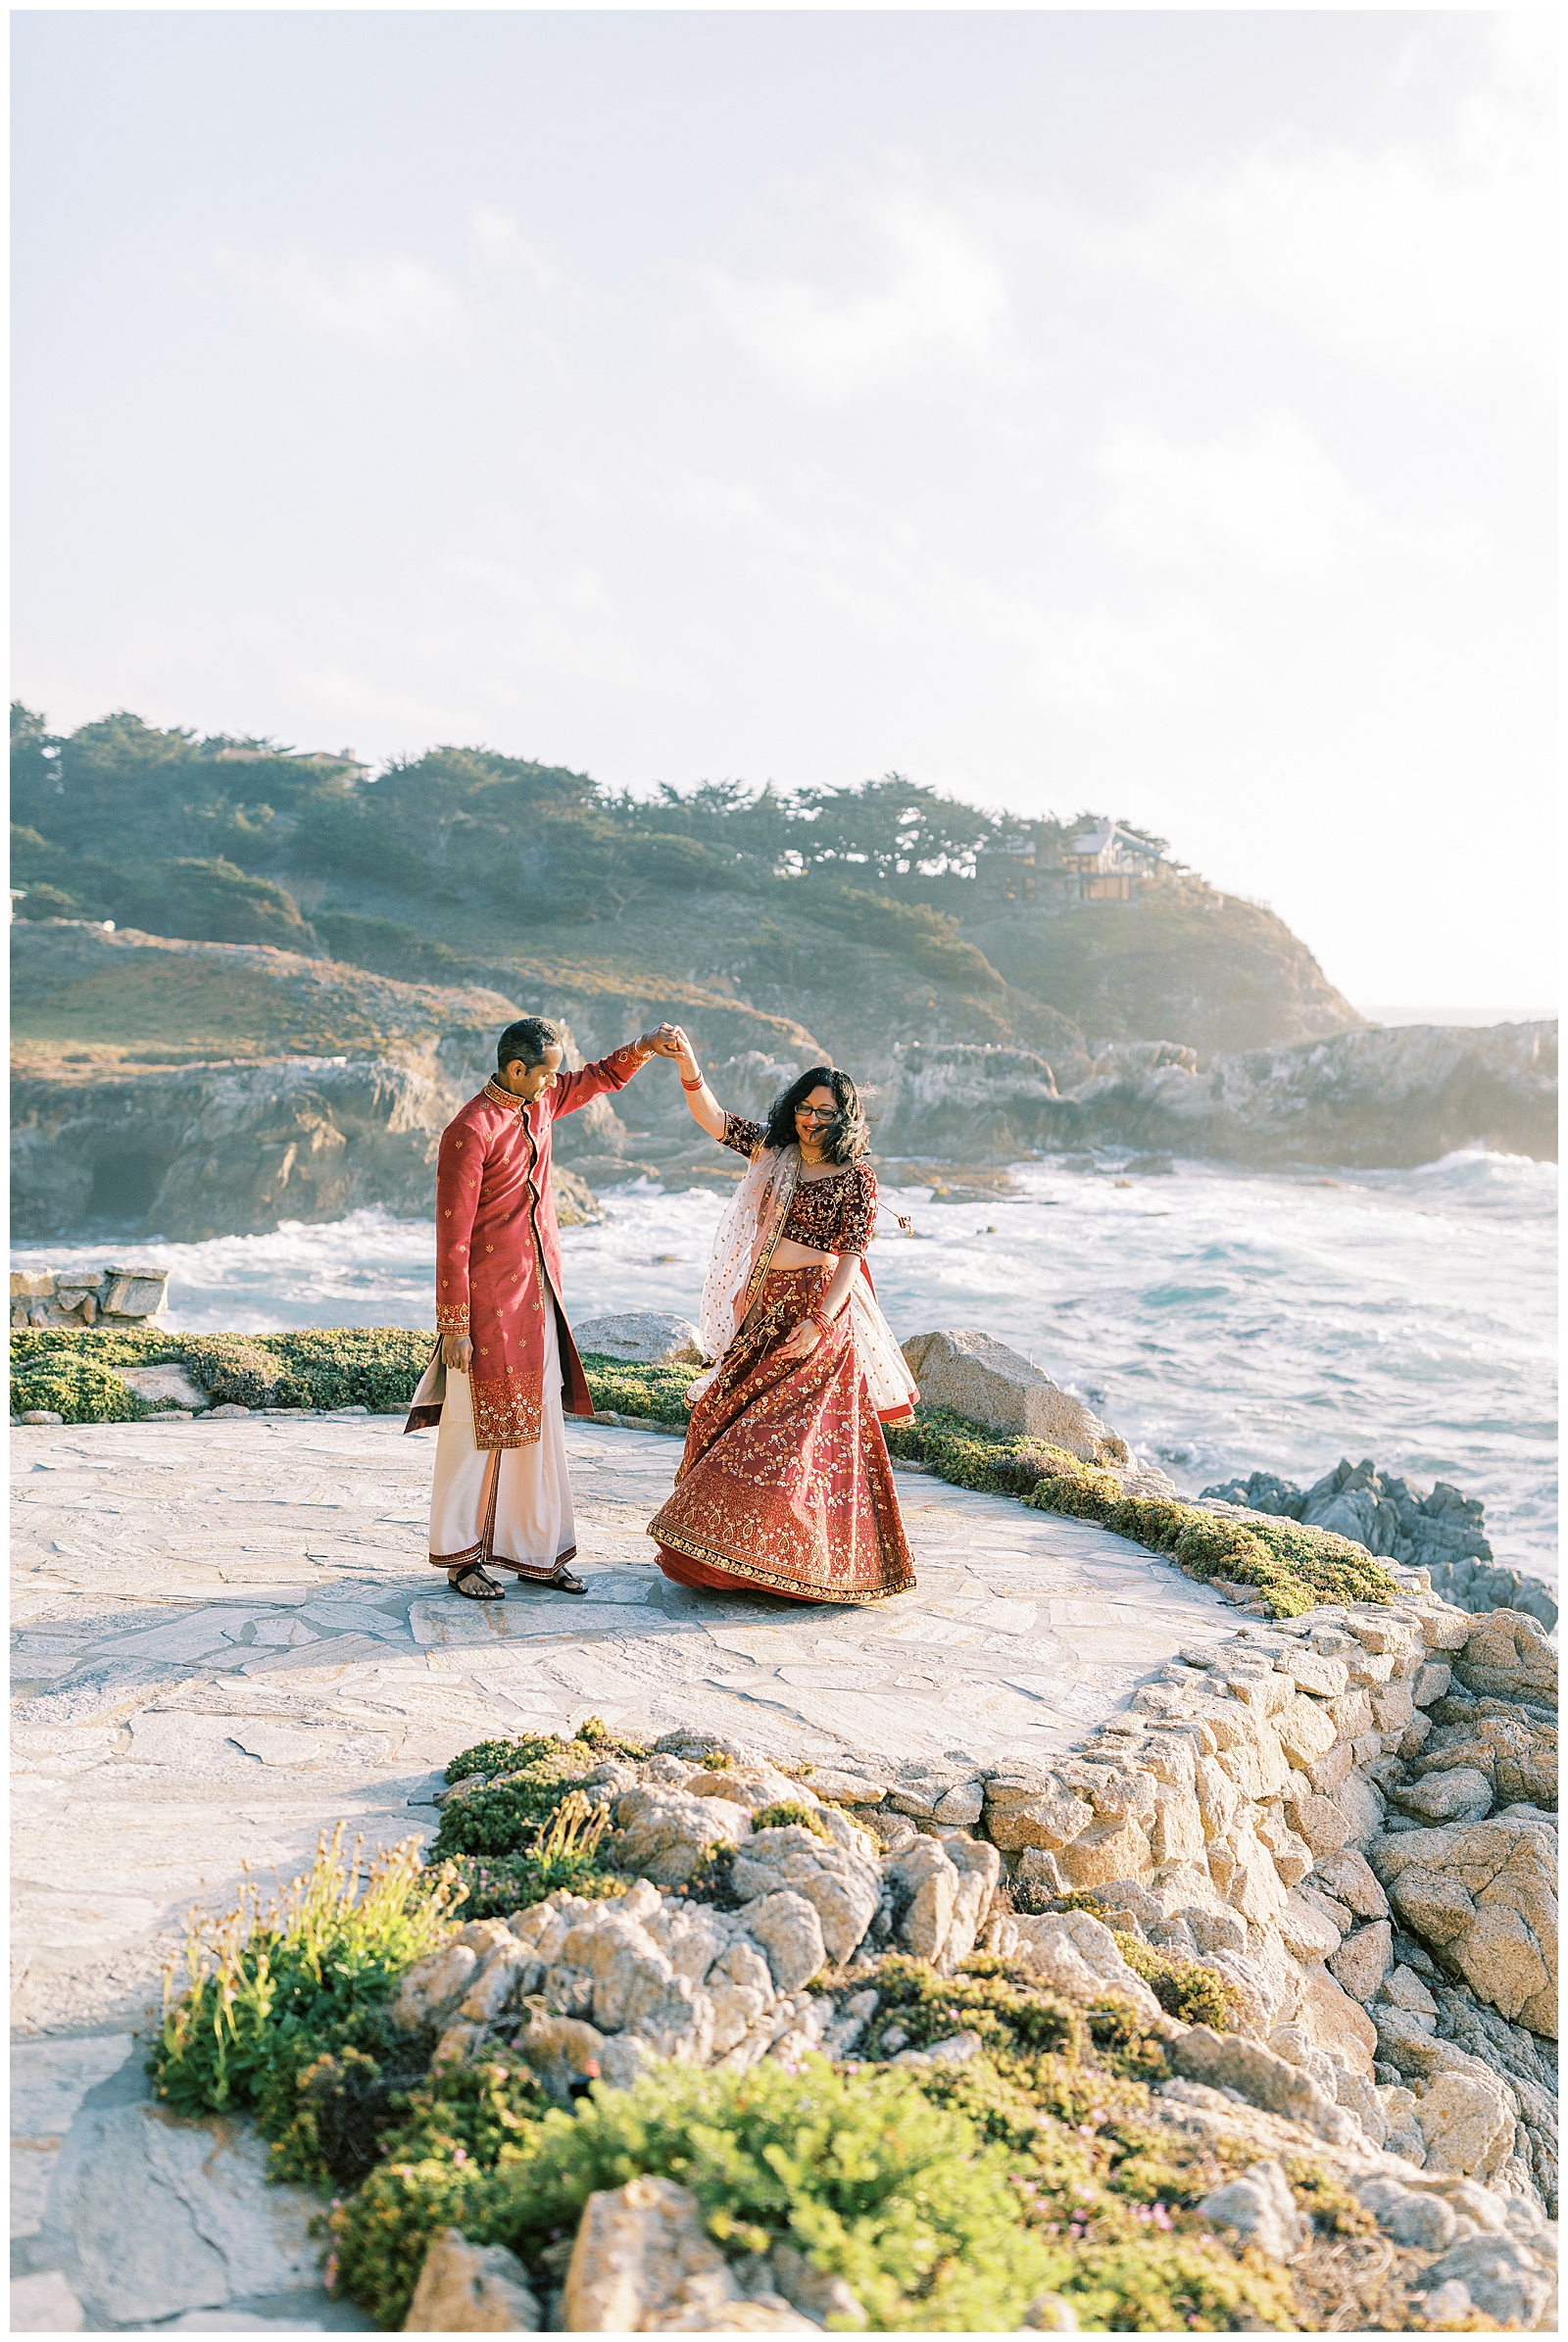 bride and groom dancing along cliffside in carmel-by-the-sea california wedding photographer megan helm photography